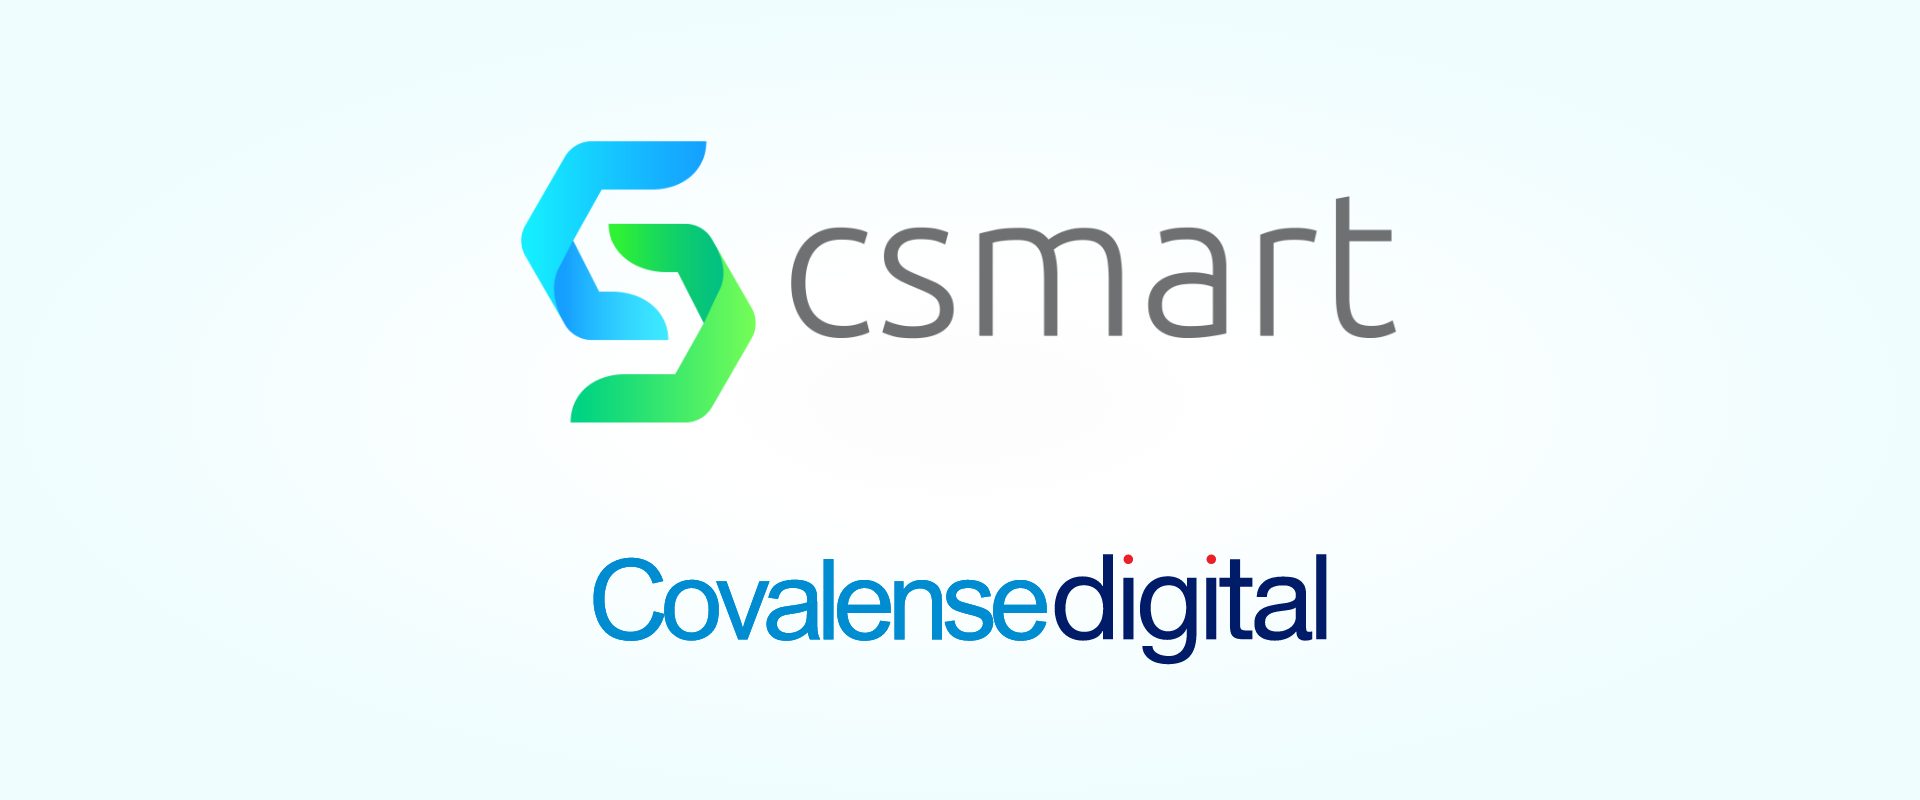 Covalensedigital elevates its momentum in cloud technology, achieves integration of Csmart and OMC cloud